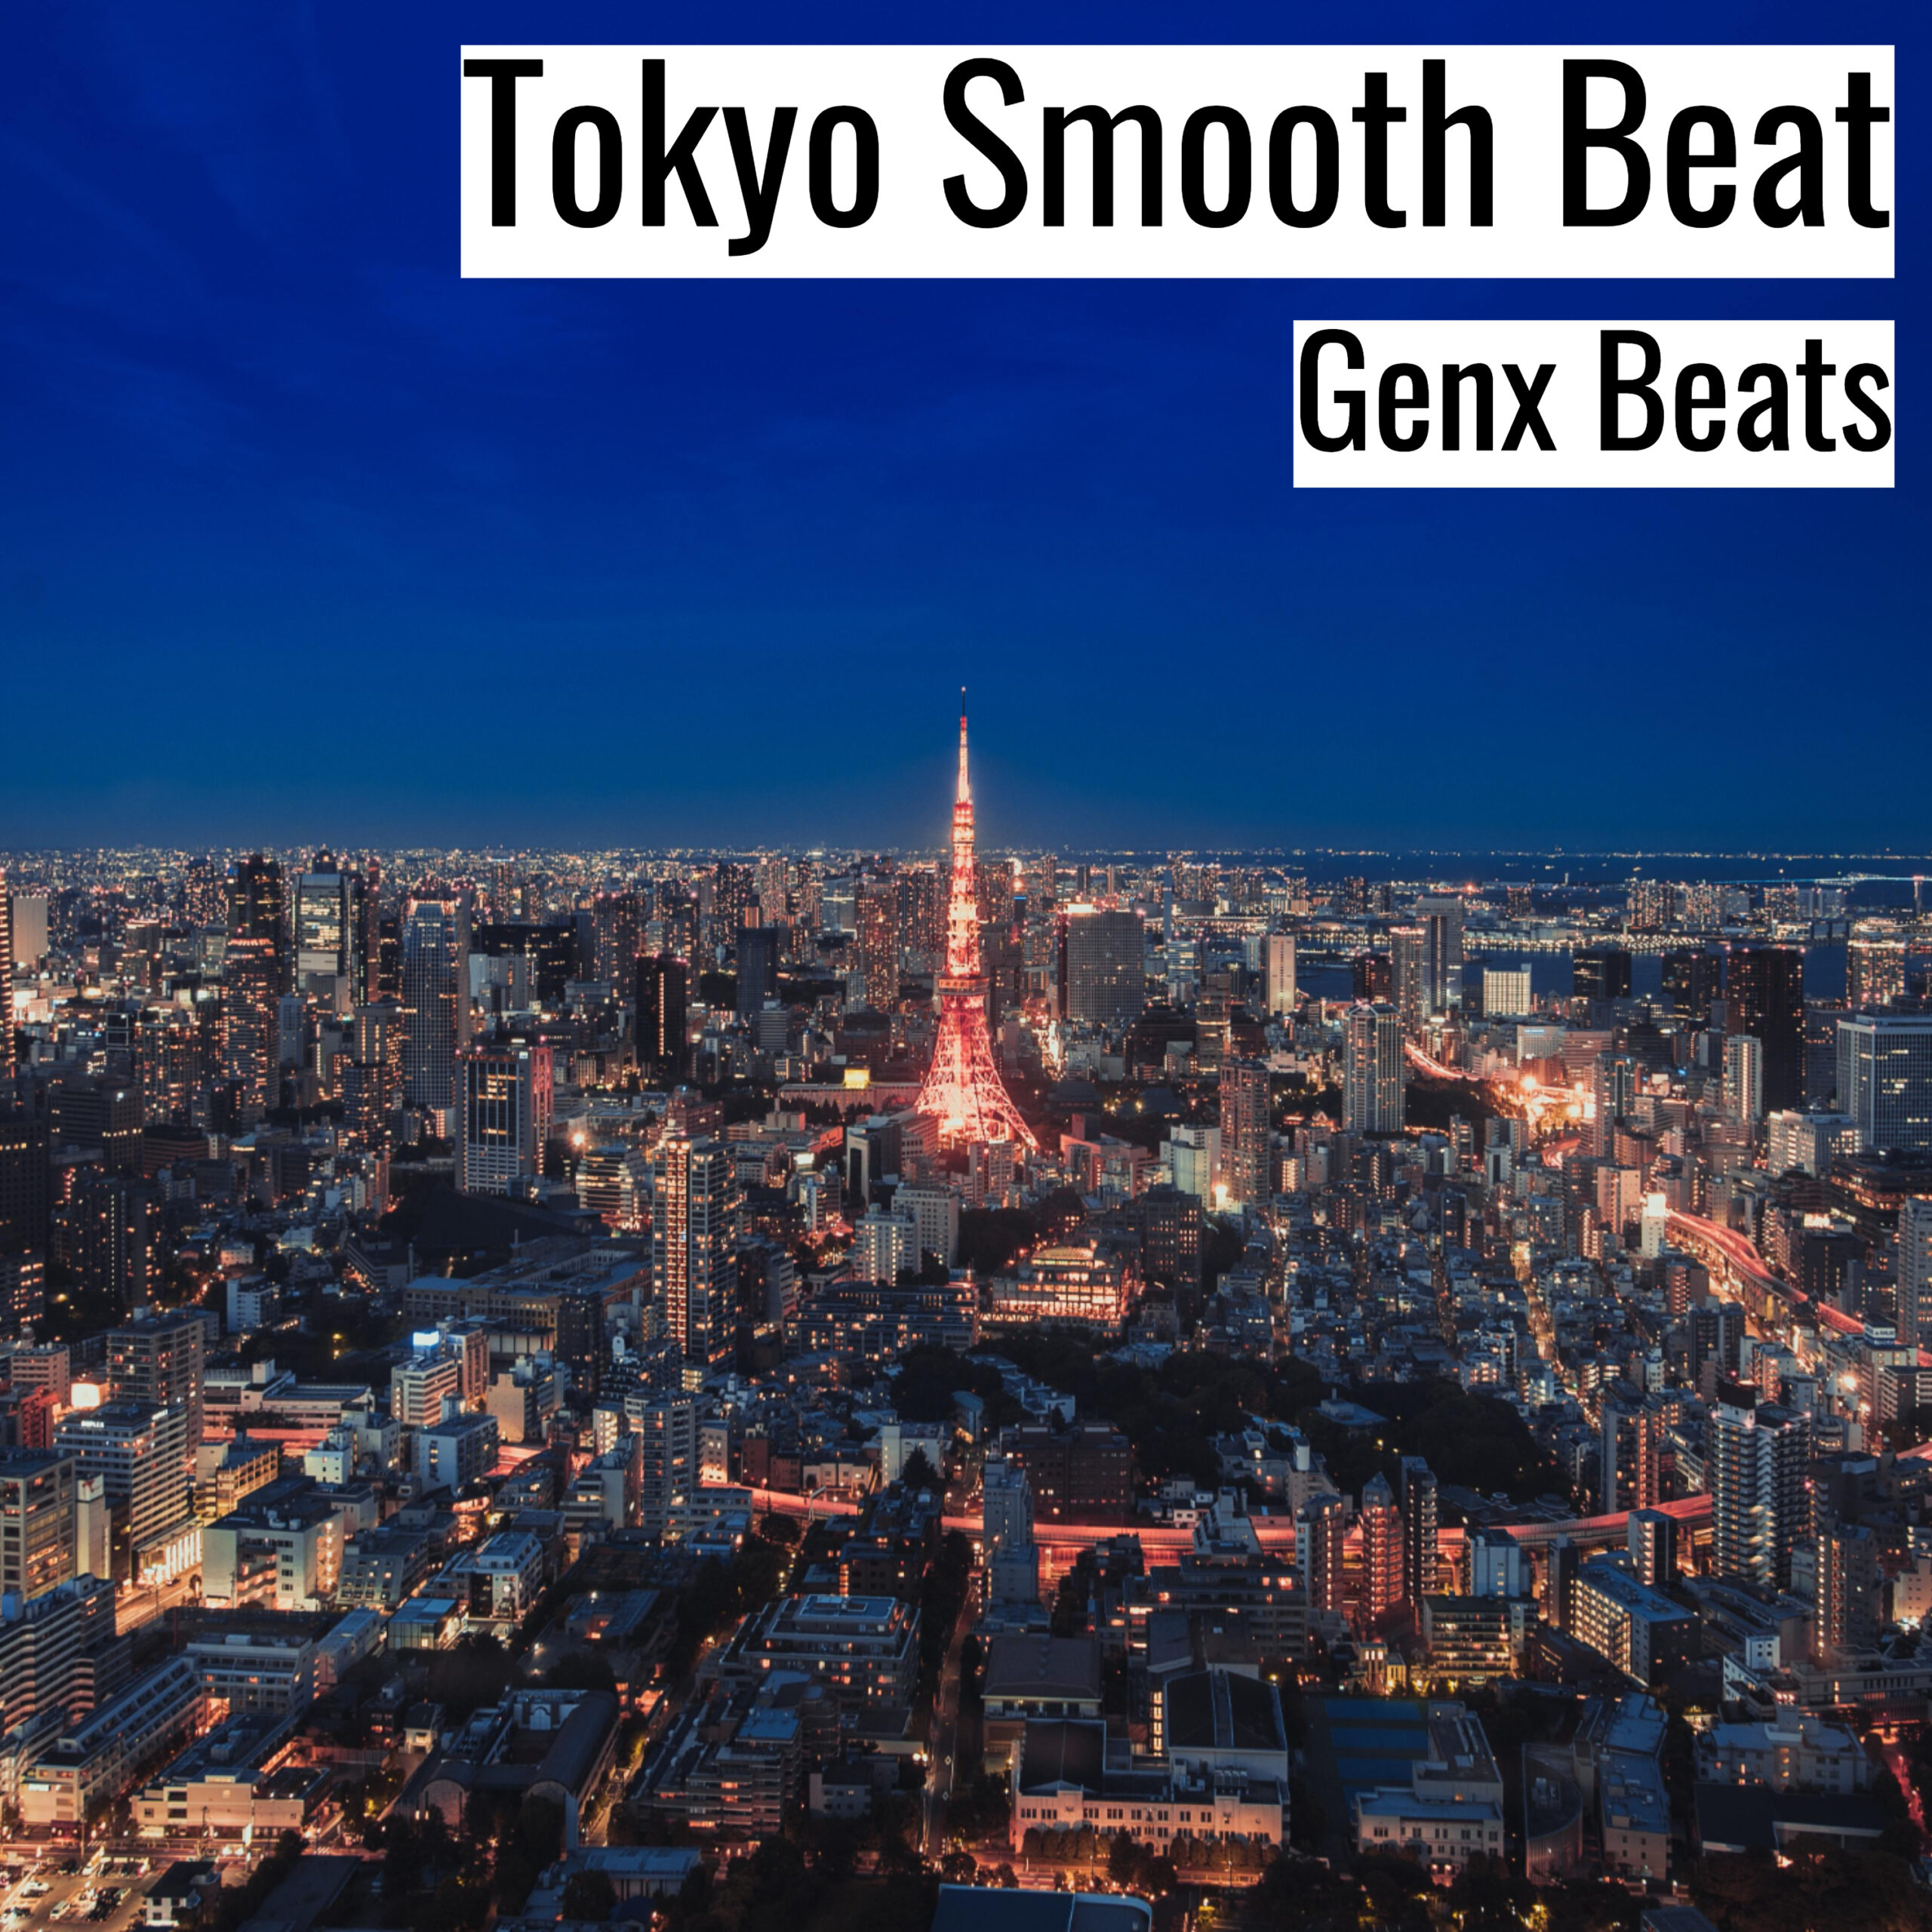 Tokyo Smooth Beat scaled